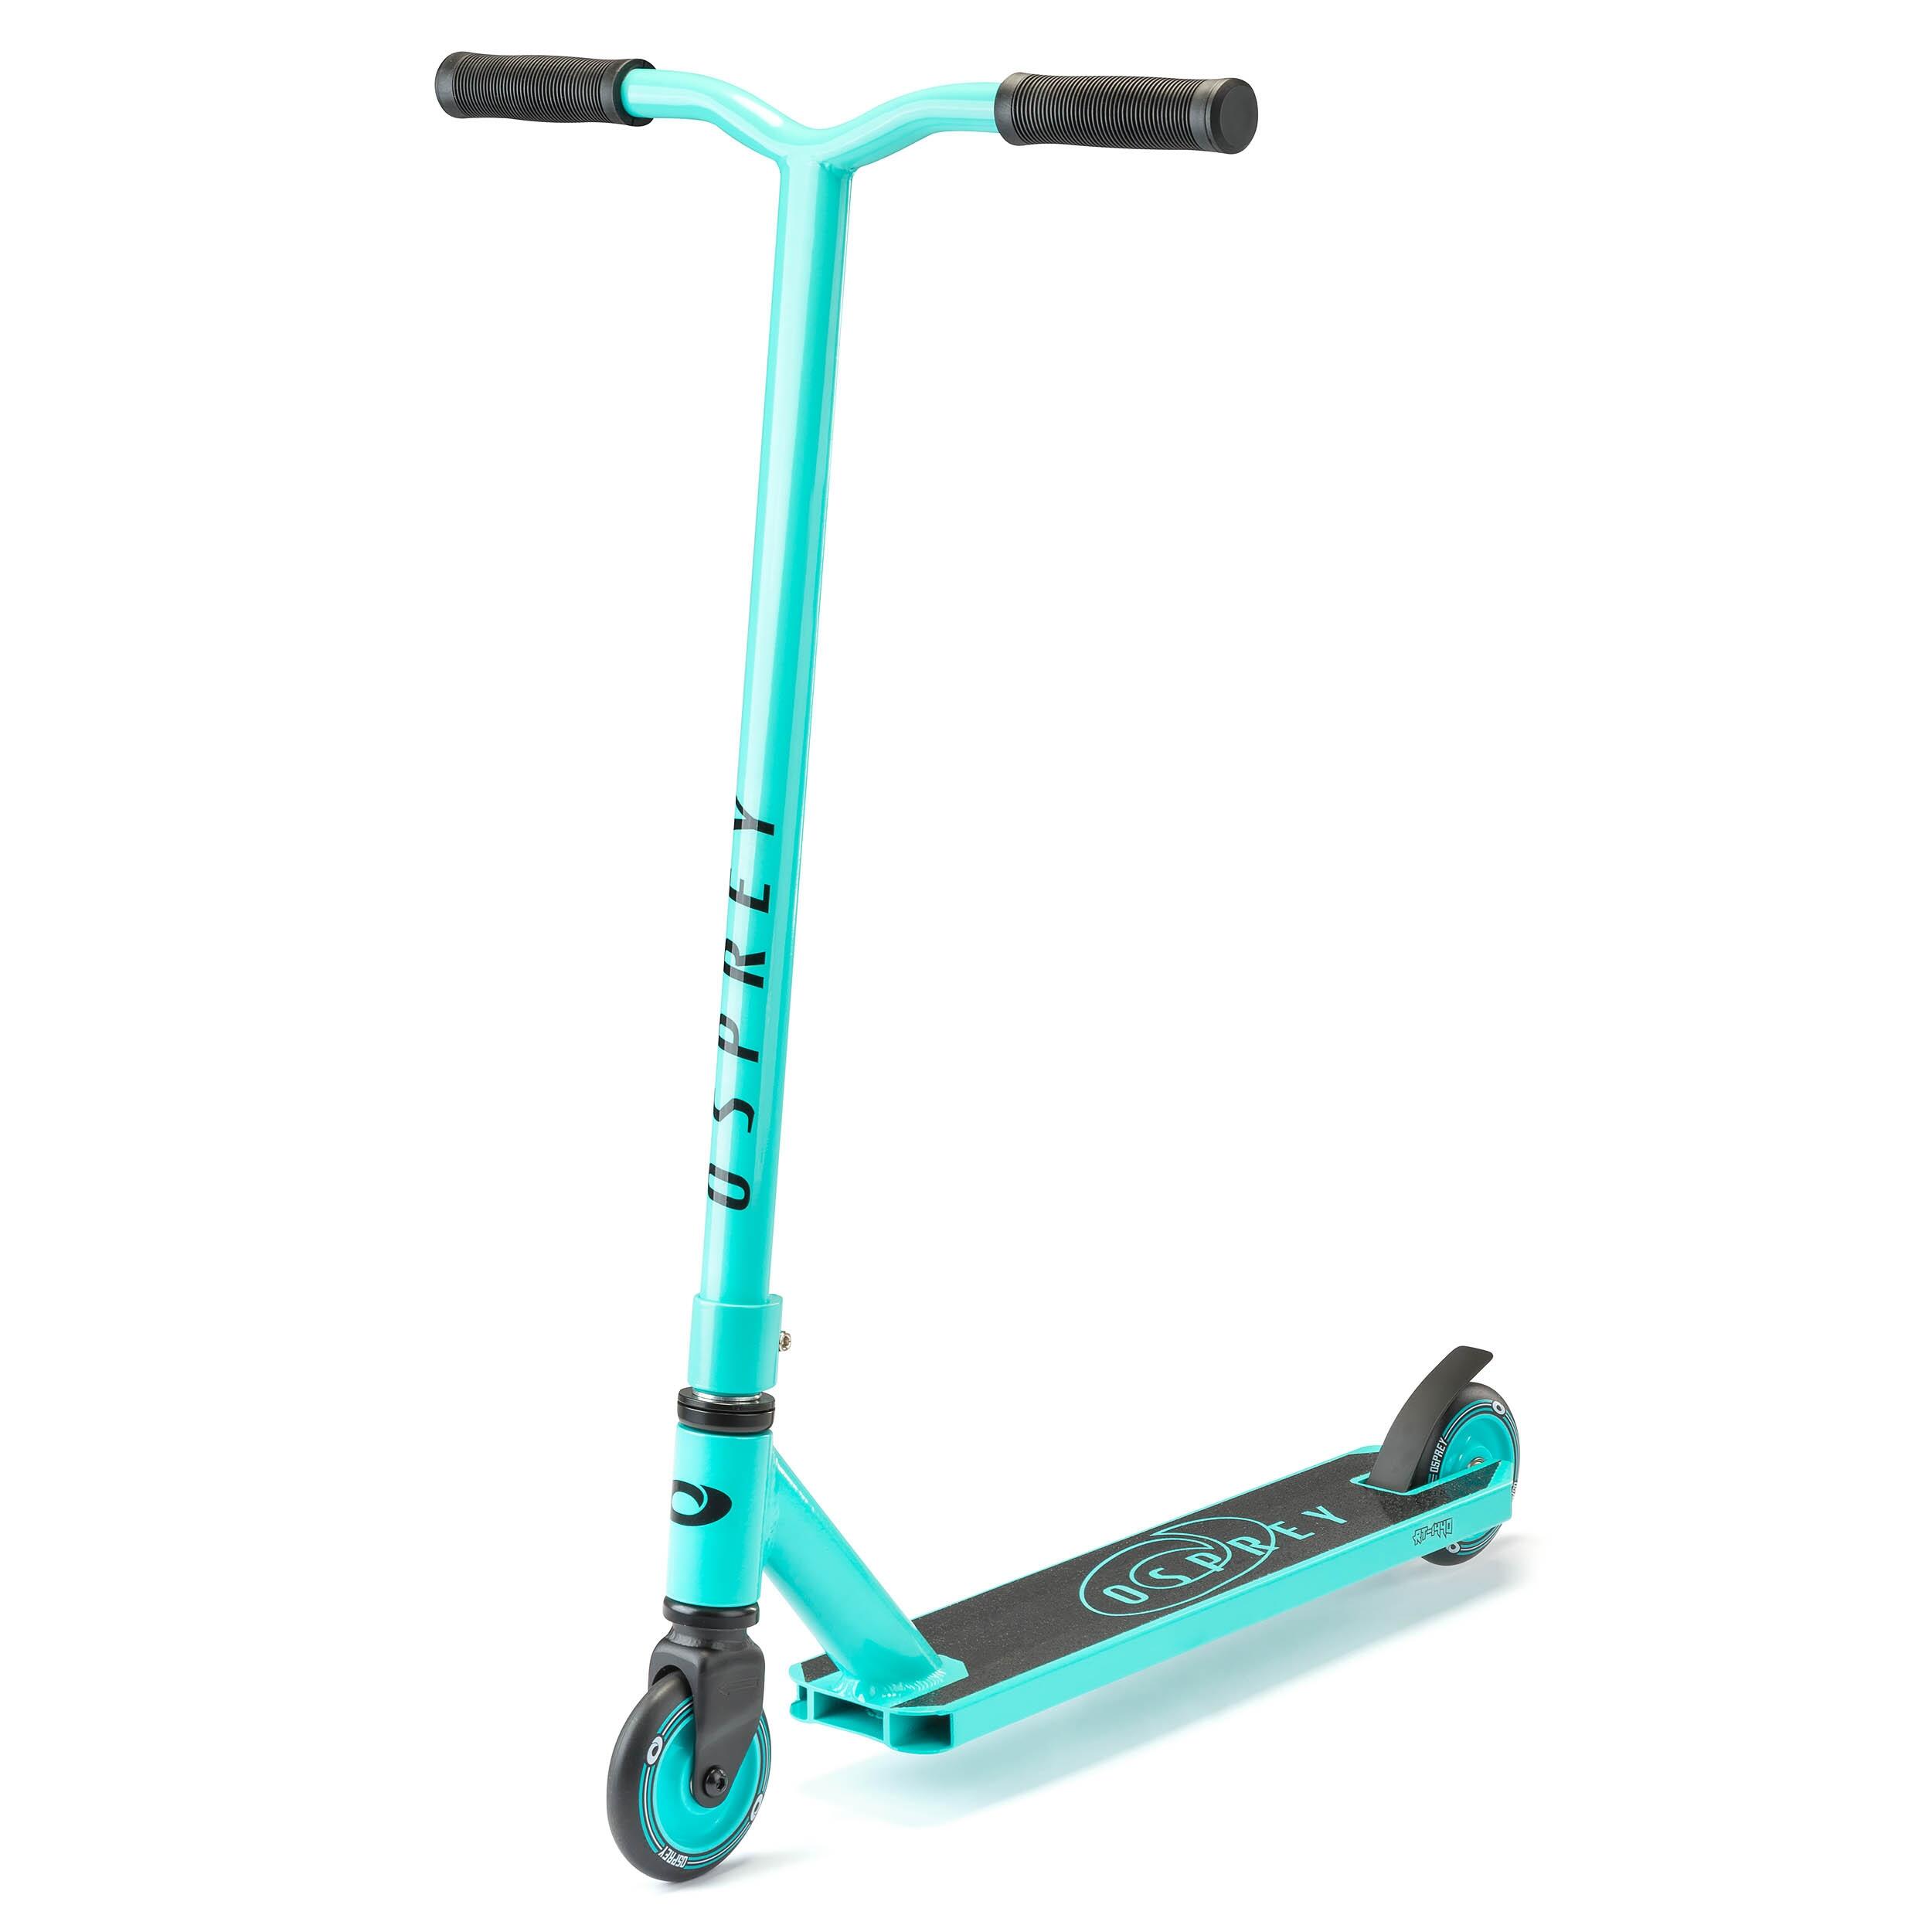 OSPREY ACTION SPORTS Osprey Stunt Scooter RT-1440, for Adults and Kids Kick T Bar Scooter